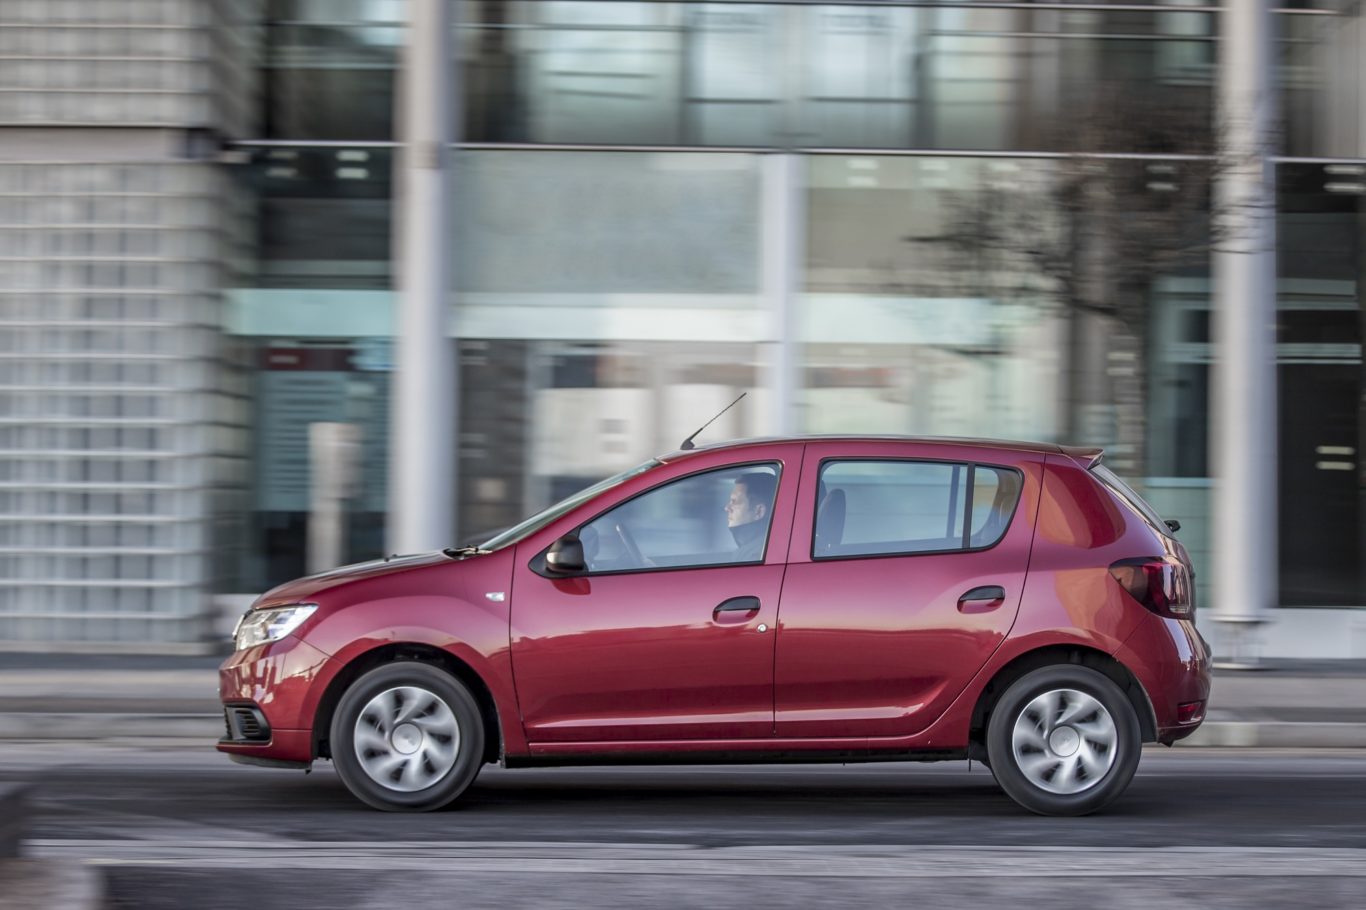 The Sandero is ideal for around town 